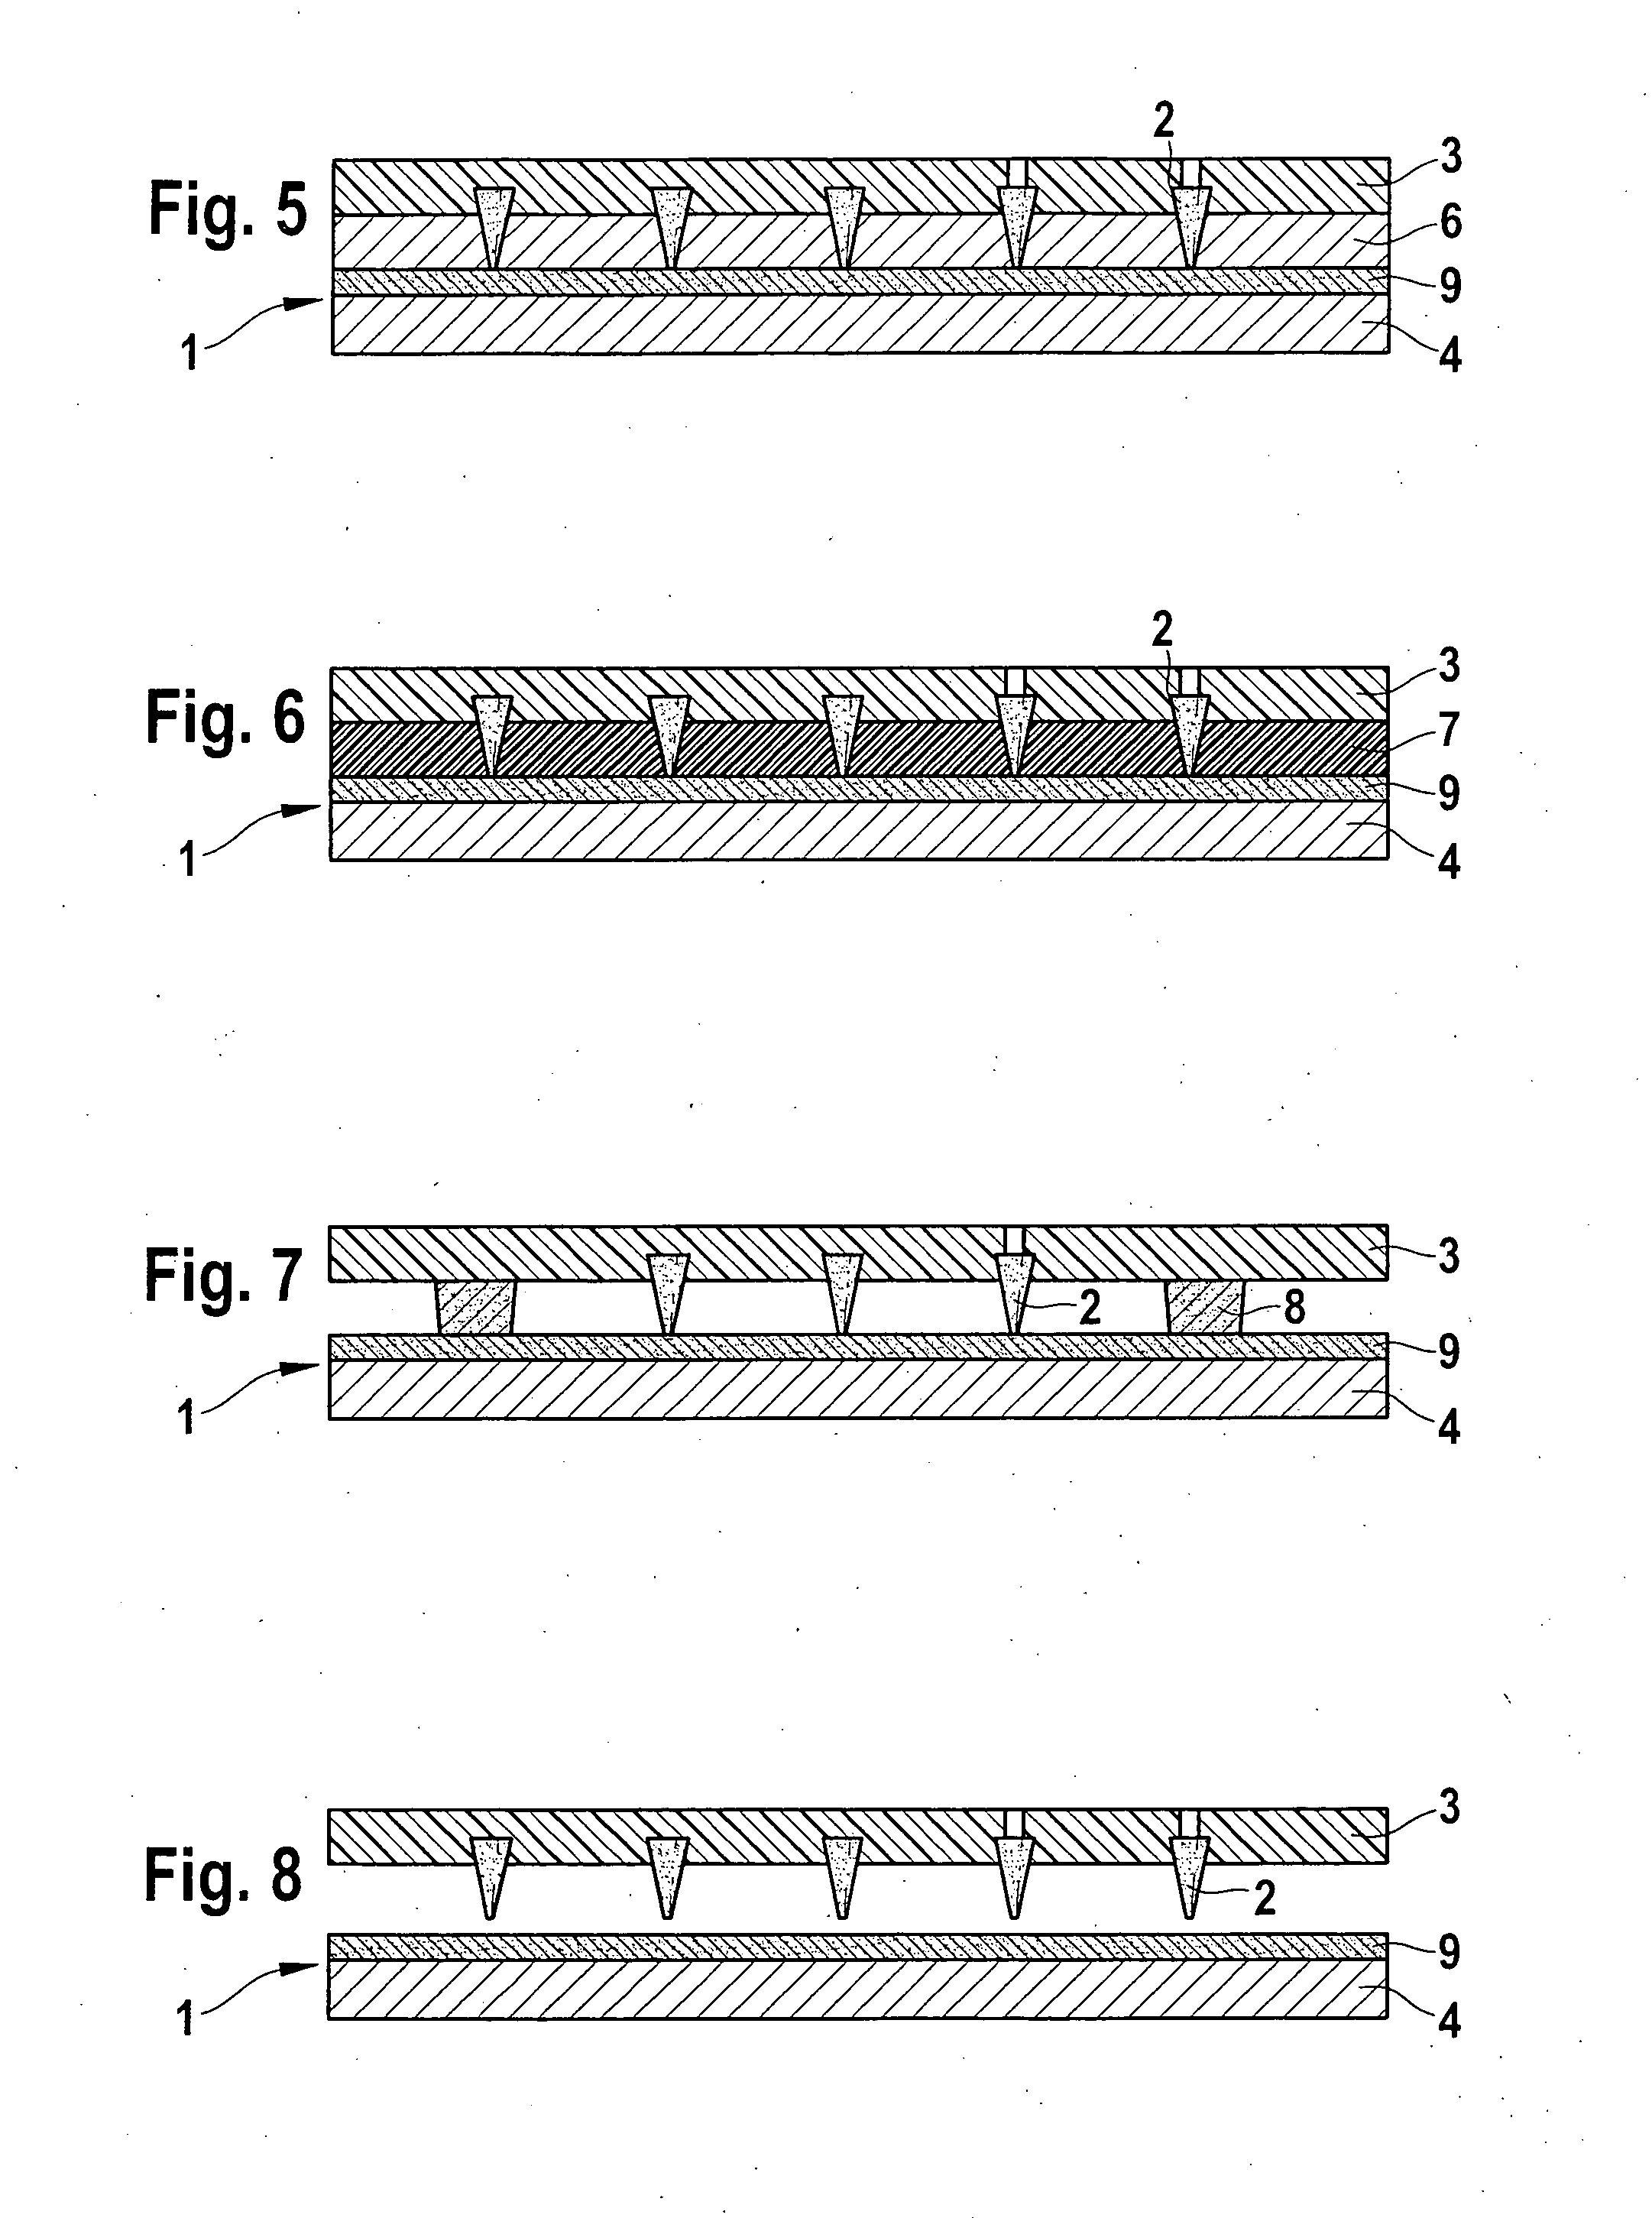 Method for producing a device including an array of microneedles on a support, and device producible according to this method